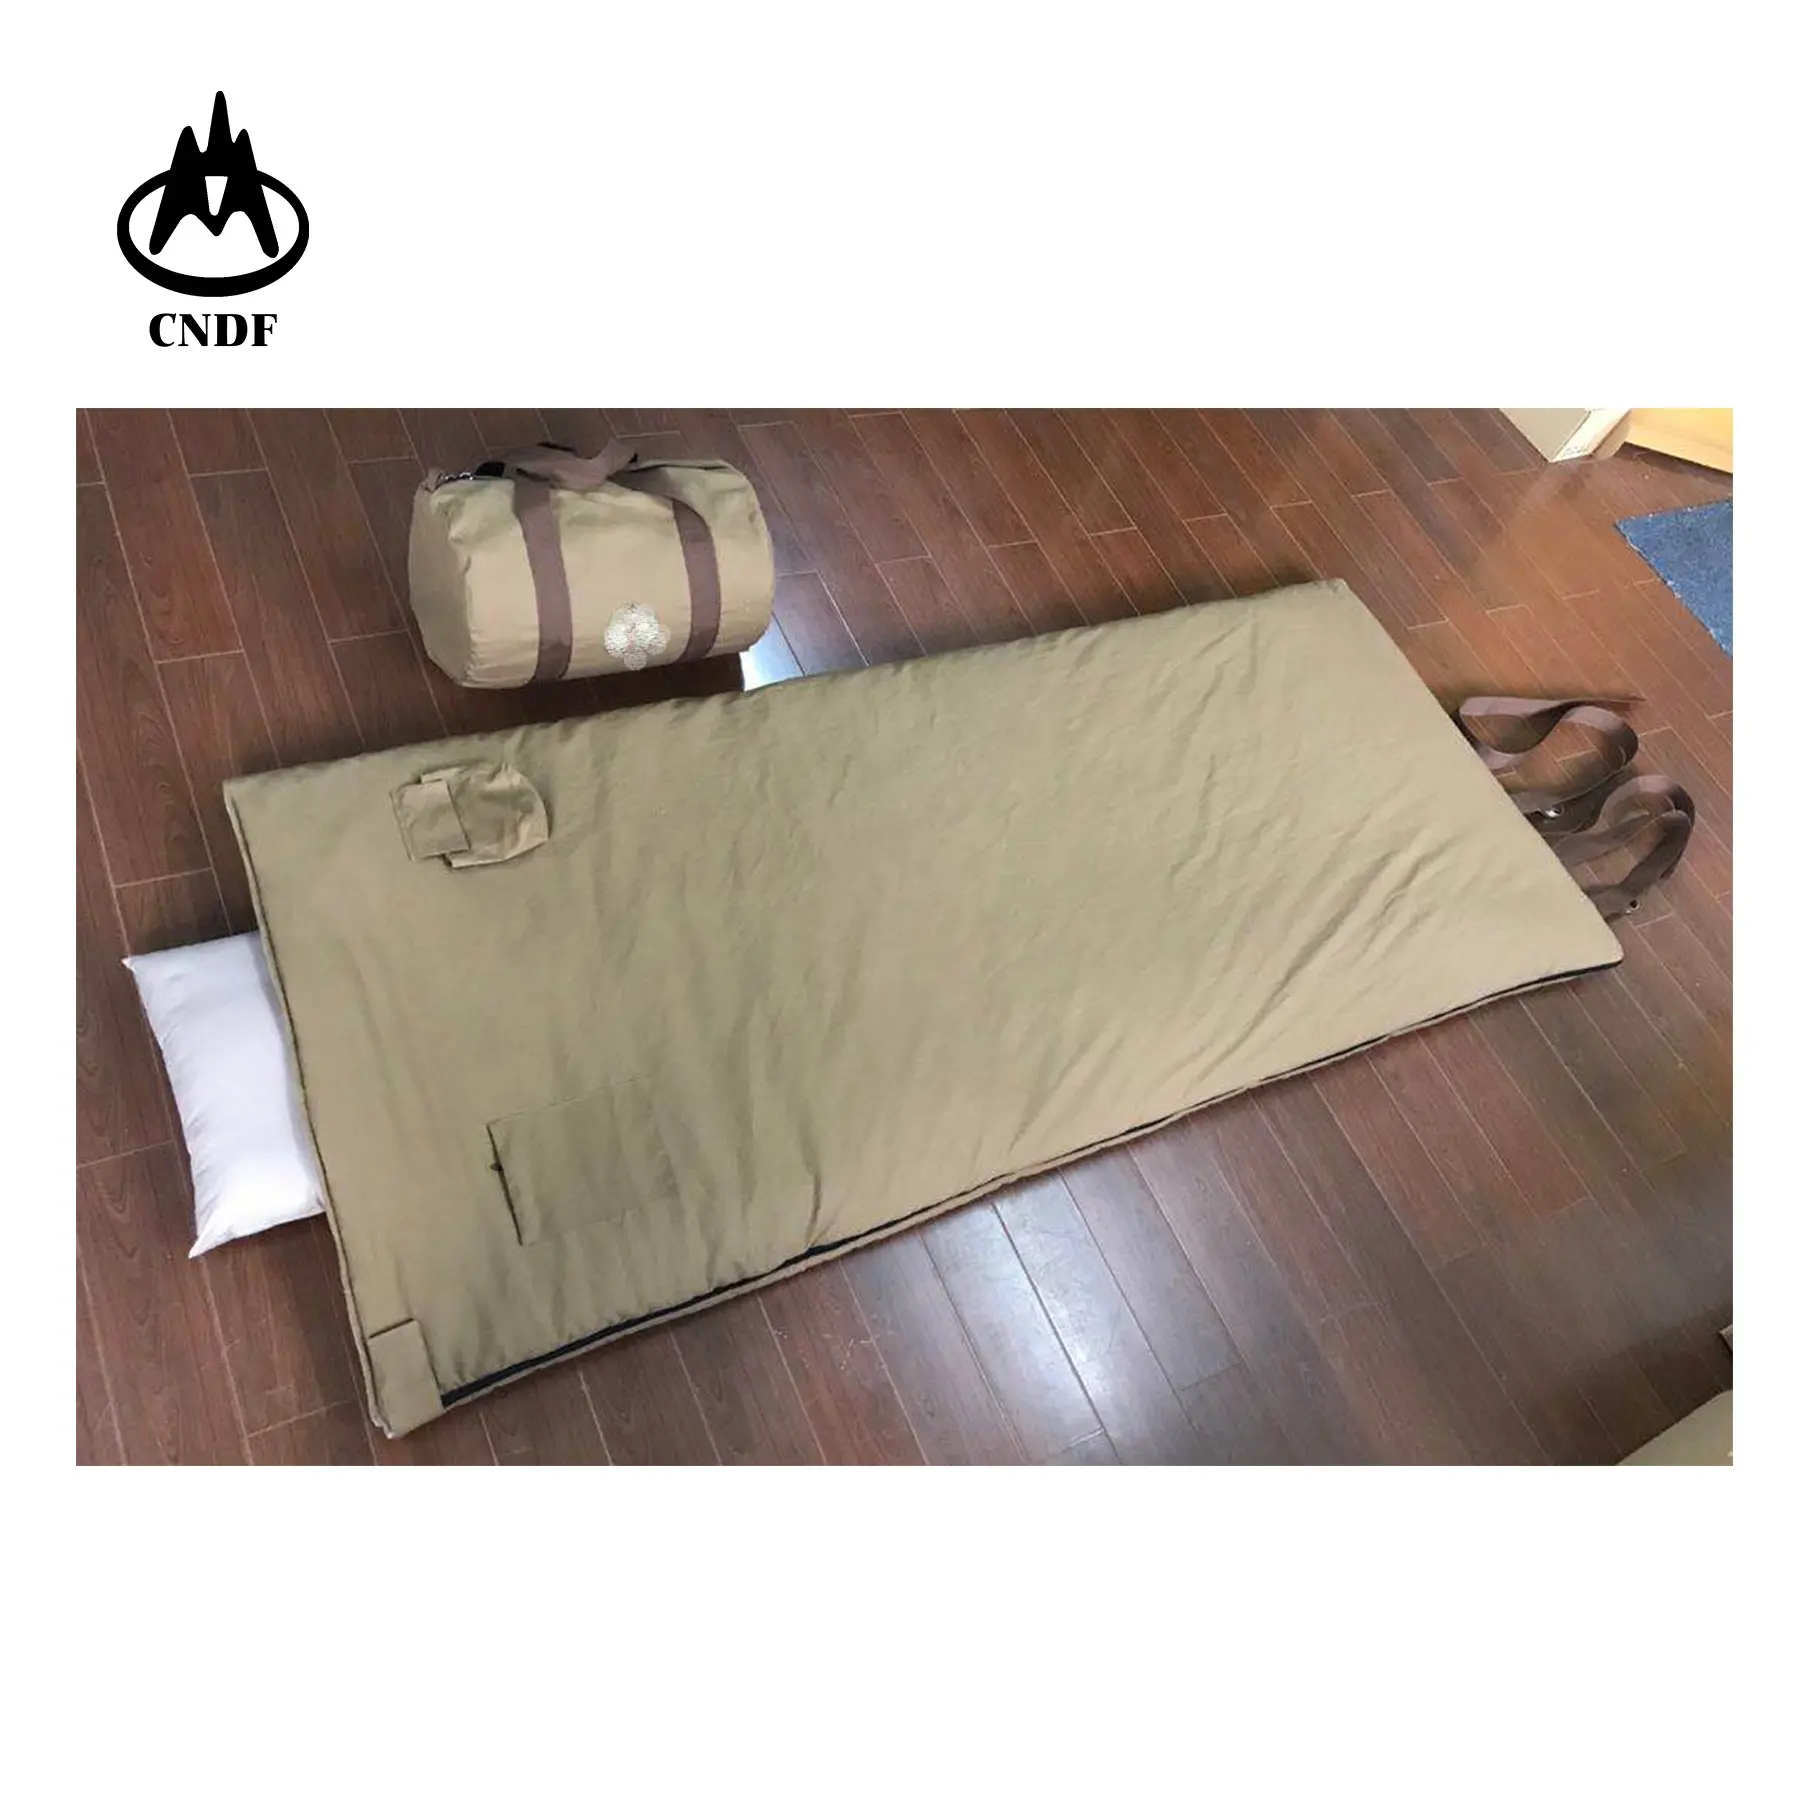 canvas army Military sleeping bag with carry bag middle east big size warm cotton sleeping bag, water resistant